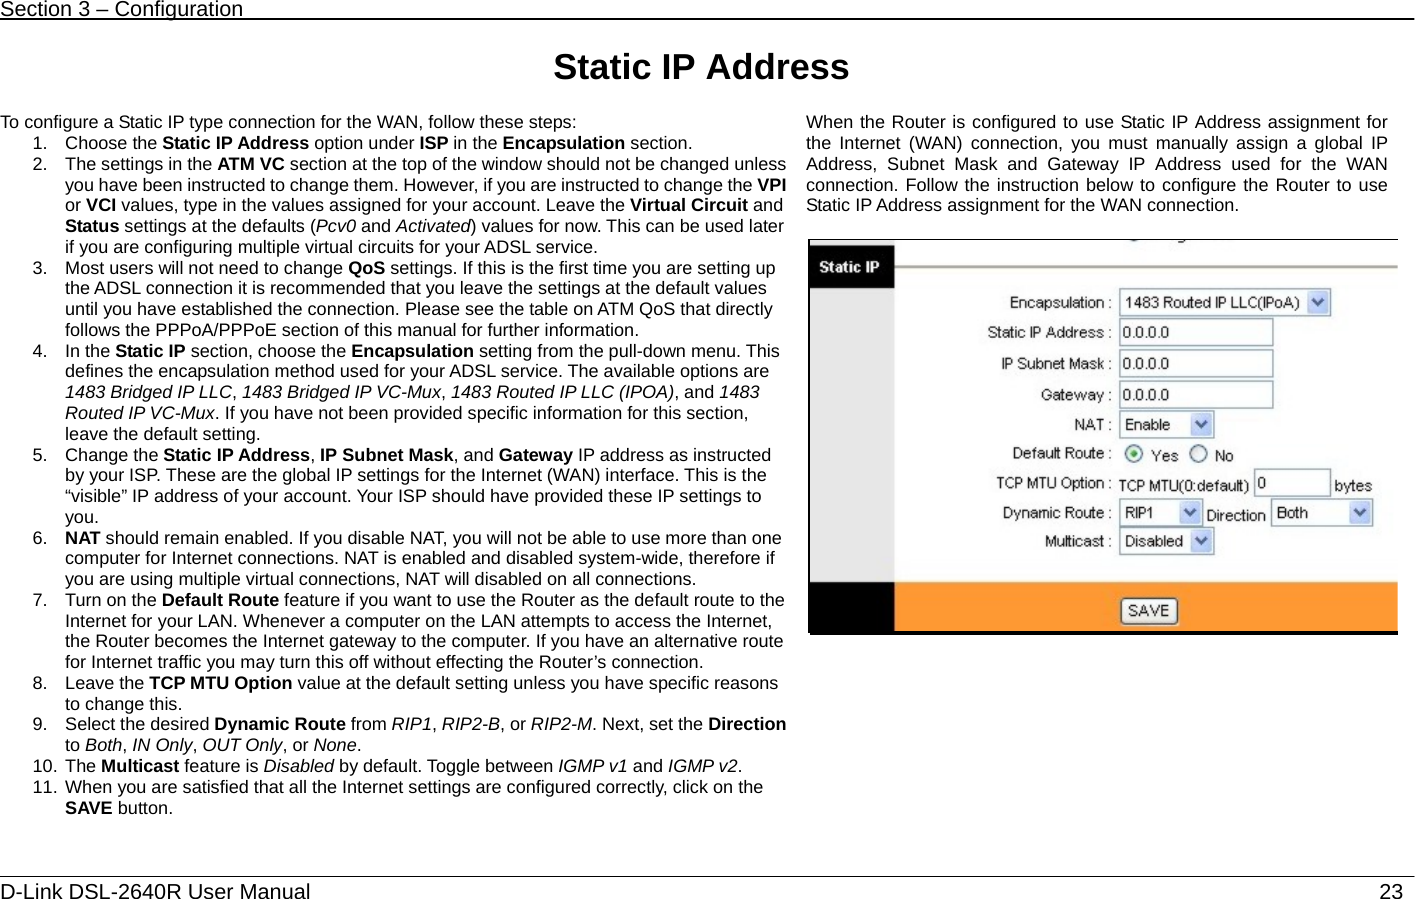 Section 3 – Configuration   D-Link DSL-2640R User Manual                           23Static IP Address  To configure a Static IP type connection for the WAN, follow these steps: 1. Choose the Static IP Address option under ISP in the Encapsulation section. 2.  The settings in the ATM VC section at the top of the window should not be changed unless you have been instructed to change them. However, if you are instructed to change the VPI or VCI values, type in the values assigned for your account. Leave the Virtual Circuit and Status settings at the defaults (Pcv0 and Activated) values for now. This can be used later if you are configuring multiple virtual circuits for your ADSL service. 3.  Most users will not need to change QoS settings. If this is the first time you are setting up the ADSL connection it is recommended that you leave the settings at the default values until you have established the connection. Please see the table on ATM QoS that directly follows the PPPoA/PPPoE section of this manual for further information. 4. In the Static IP section, choose the Encapsulation setting from the pull-down menu. This defines the encapsulation method used for your ADSL service. The available options are 1483 Bridged IP LLC, 1483 Bridged IP VC-Mux, 1483 Routed IP LLC (IPOA), and 1483 Routed IP VC-Mux. If you have not been provided specific information for this section, leave the default setting. 5. Change the Static IP Address, IP Subnet Mask, and Gateway IP address as instructed by your ISP. These are the global IP settings for the Internet (WAN) interface. This is the “visible” IP address of your account. Your ISP should have provided these IP settings to you. 6.  NAT should remain enabled. If you disable NAT, you will not be able to use more than one computer for Internet connections. NAT is enabled and disabled system-wide, therefore if you are using multiple virtual connections, NAT will disabled on all connections. 7.  Turn on the Default Route feature if you want to use the Router as the default route to the Internet for your LAN. Whenever a computer on the LAN attempts to access the Internet, the Router becomes the Internet gateway to the computer. If you have an alternative route for Internet traffic you may turn this off without effecting the Router’s connection.   8. Leave the TCP MTU Option value at the default setting unless you have specific reasons to change this.   9.  Select the desired Dynamic Route from RIP1, RIP2-B, or RIP2-M. Next, set the Direction to Both, IN Only, OUT Only, or None.  10. The Multicast feature is Disabled by default. Toggle between IGMP v1 and IGMP v2.  11. When you are satisfied that all the Internet settings are configured correctly, click on the SAVE button. When the Router is configured to use Static IP Address assignment for the Internet (WAN) connection, you must manually assign a global IP Address, Subnet Mask and Gateway IP Address used for the WAN connection. Follow the instruction below to configure the Router to use Static IP Address assignment for the WAN connection.    